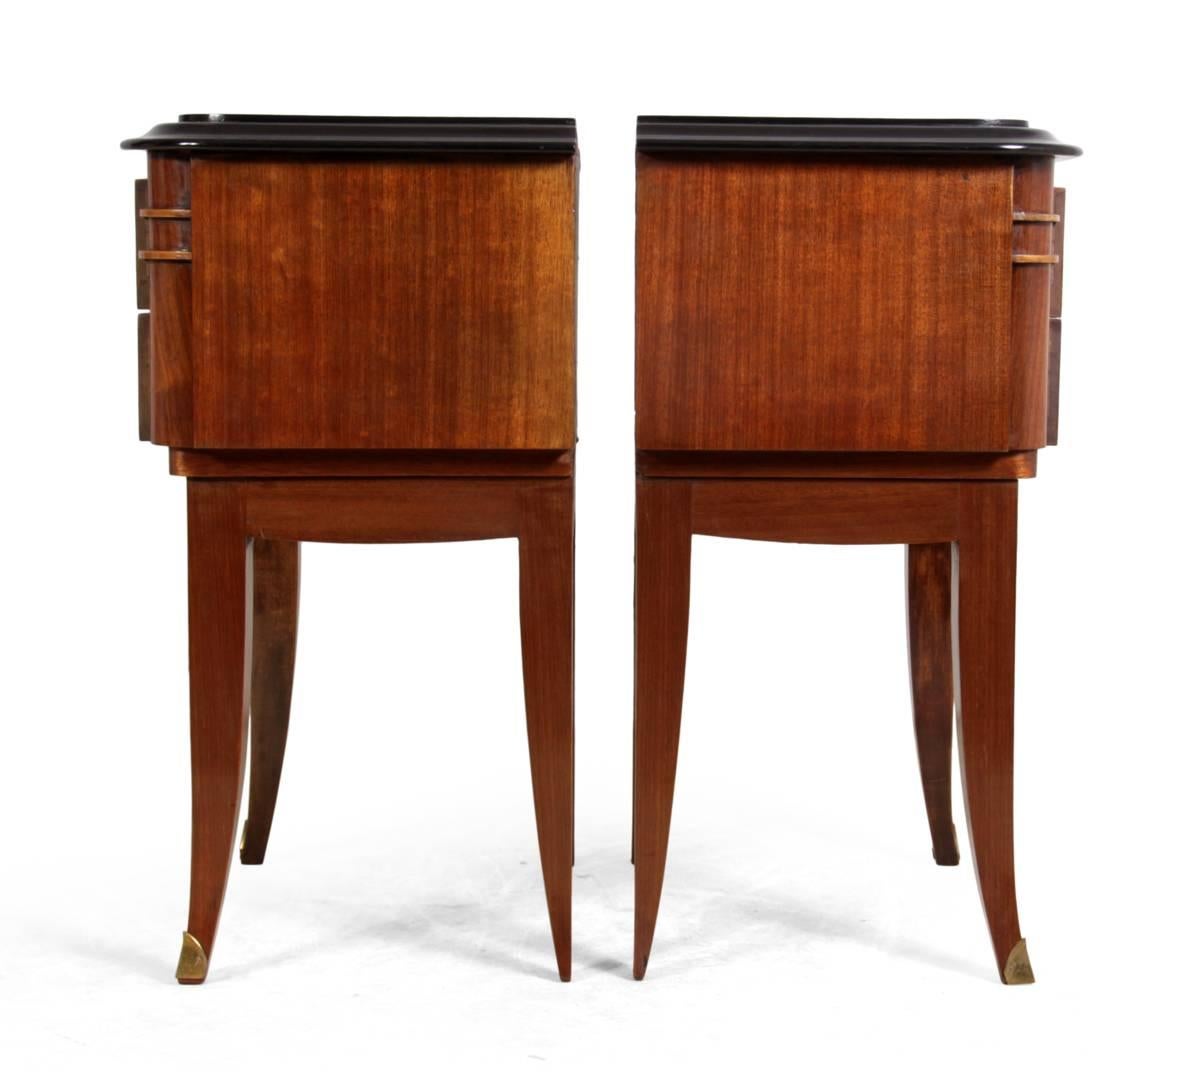 Rosewood Pair of Art Deco Bedside Tables, circa 1920